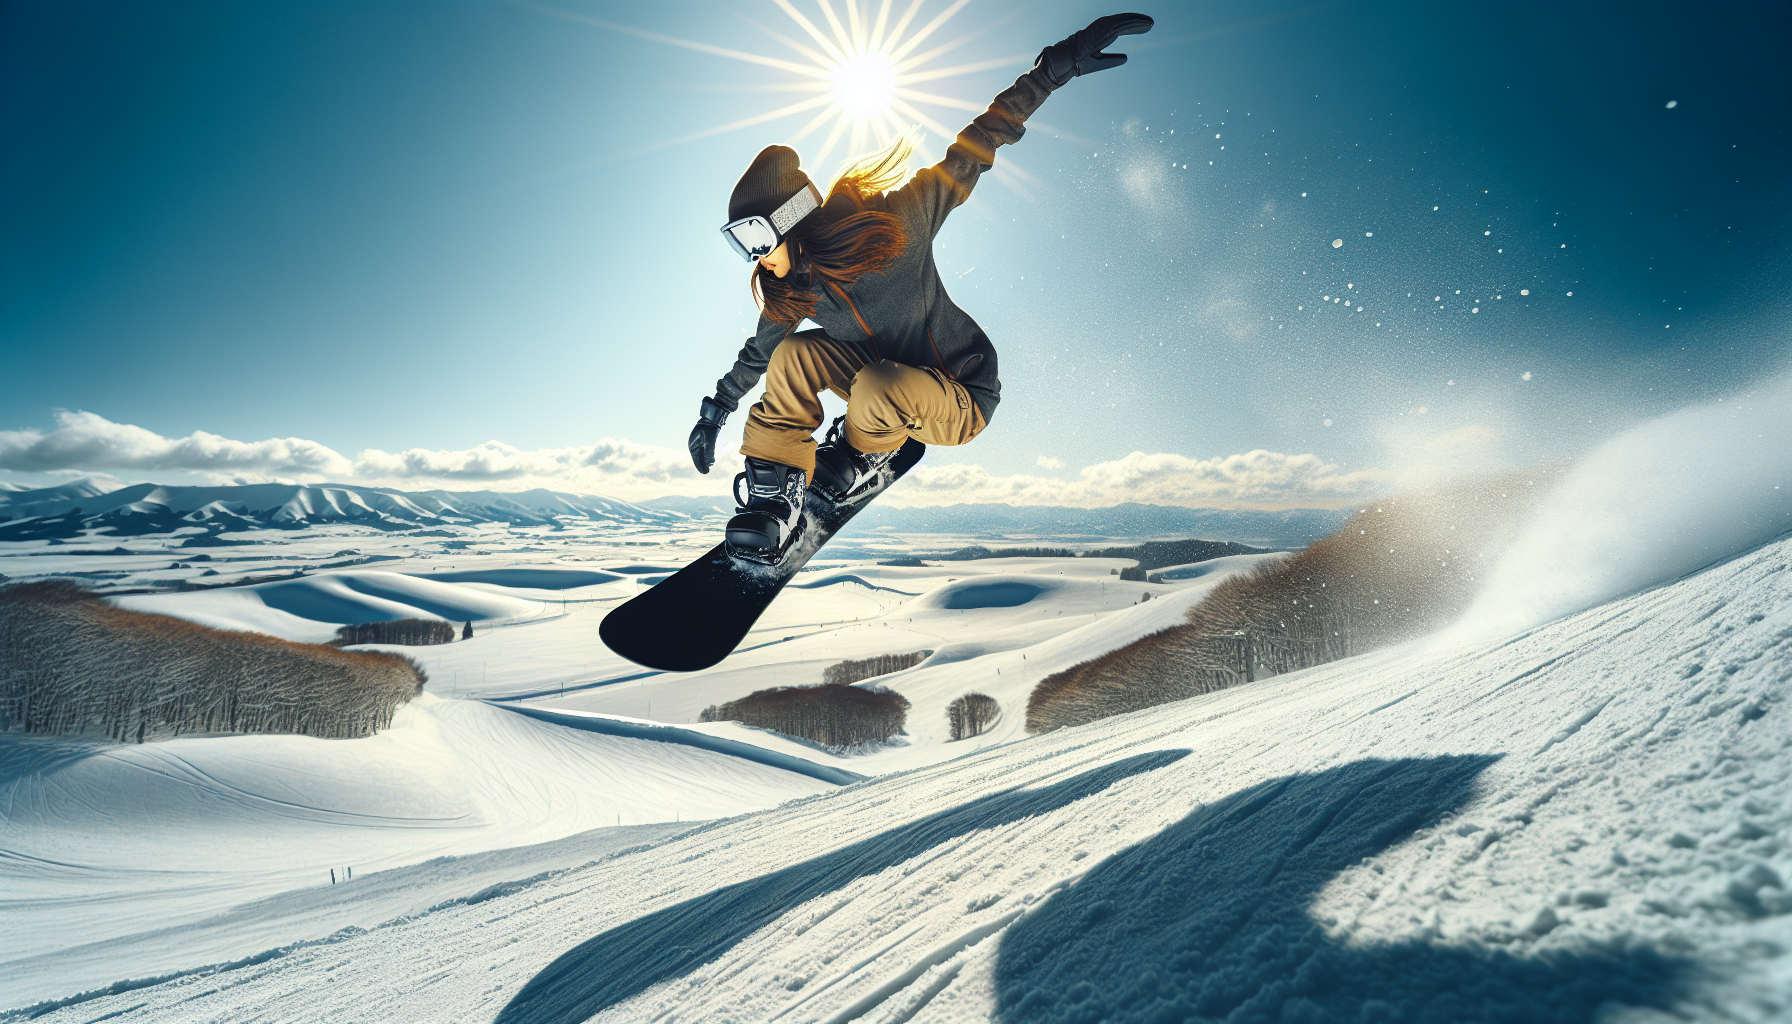 Essential Snowboarding Safety: Understanding Tips for Avoiding Injuries and Riding Responsibly